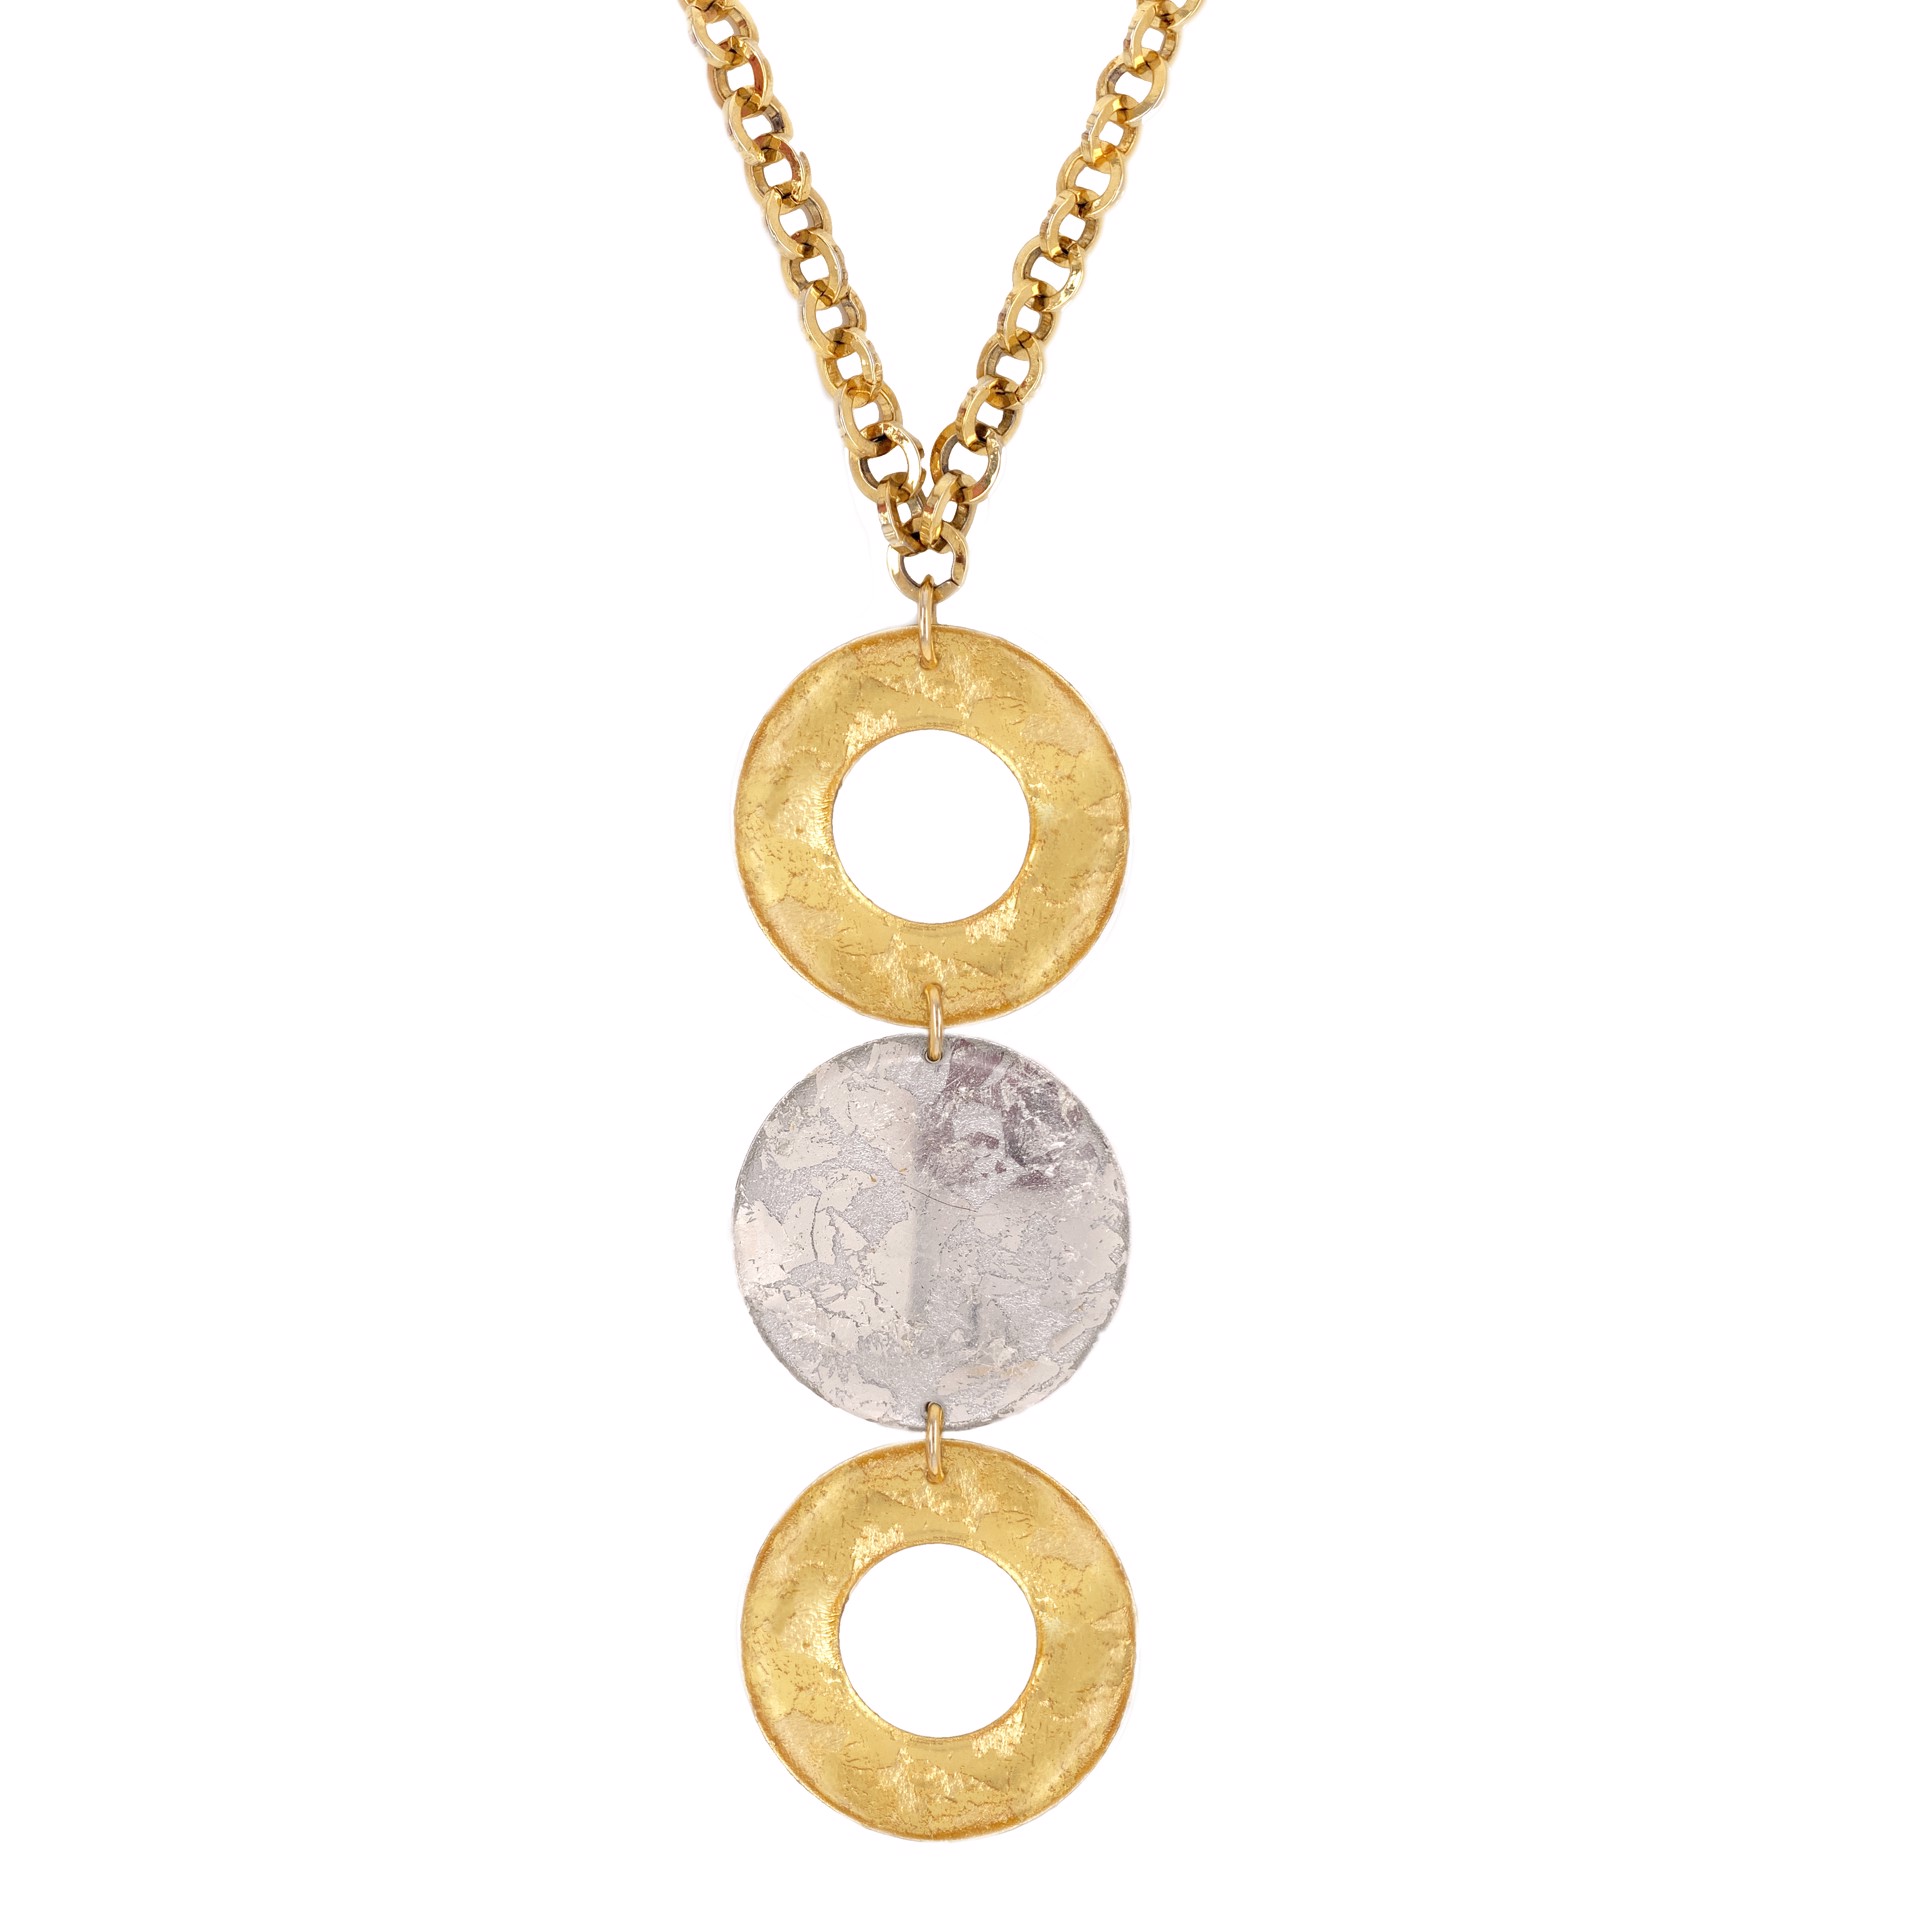 Triple O Necklace 24" Gold and Silver by Evocateur